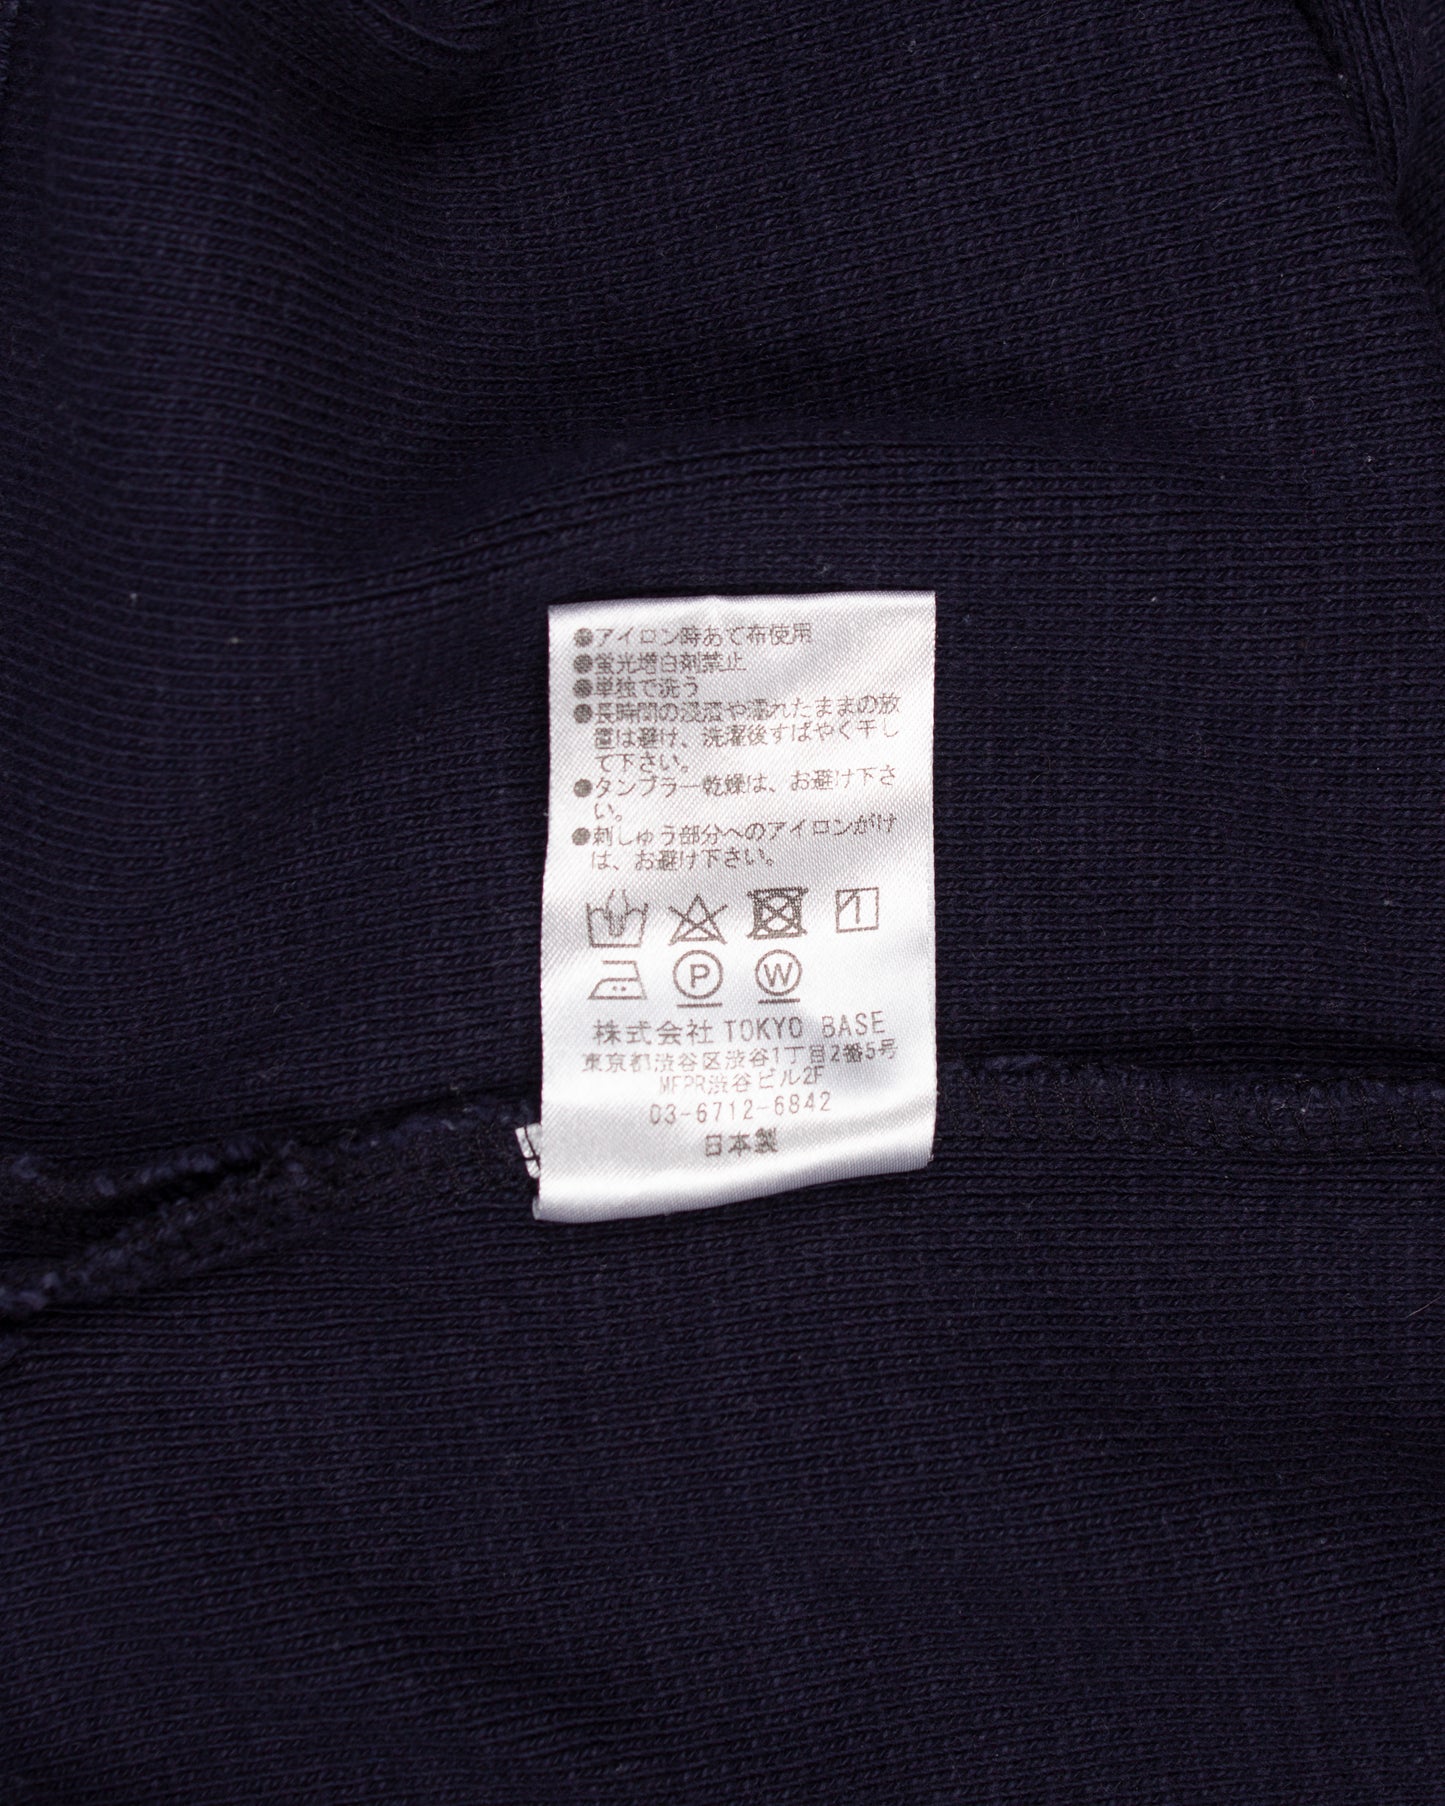 N(N) Embroided Shotrsleeve Jersey